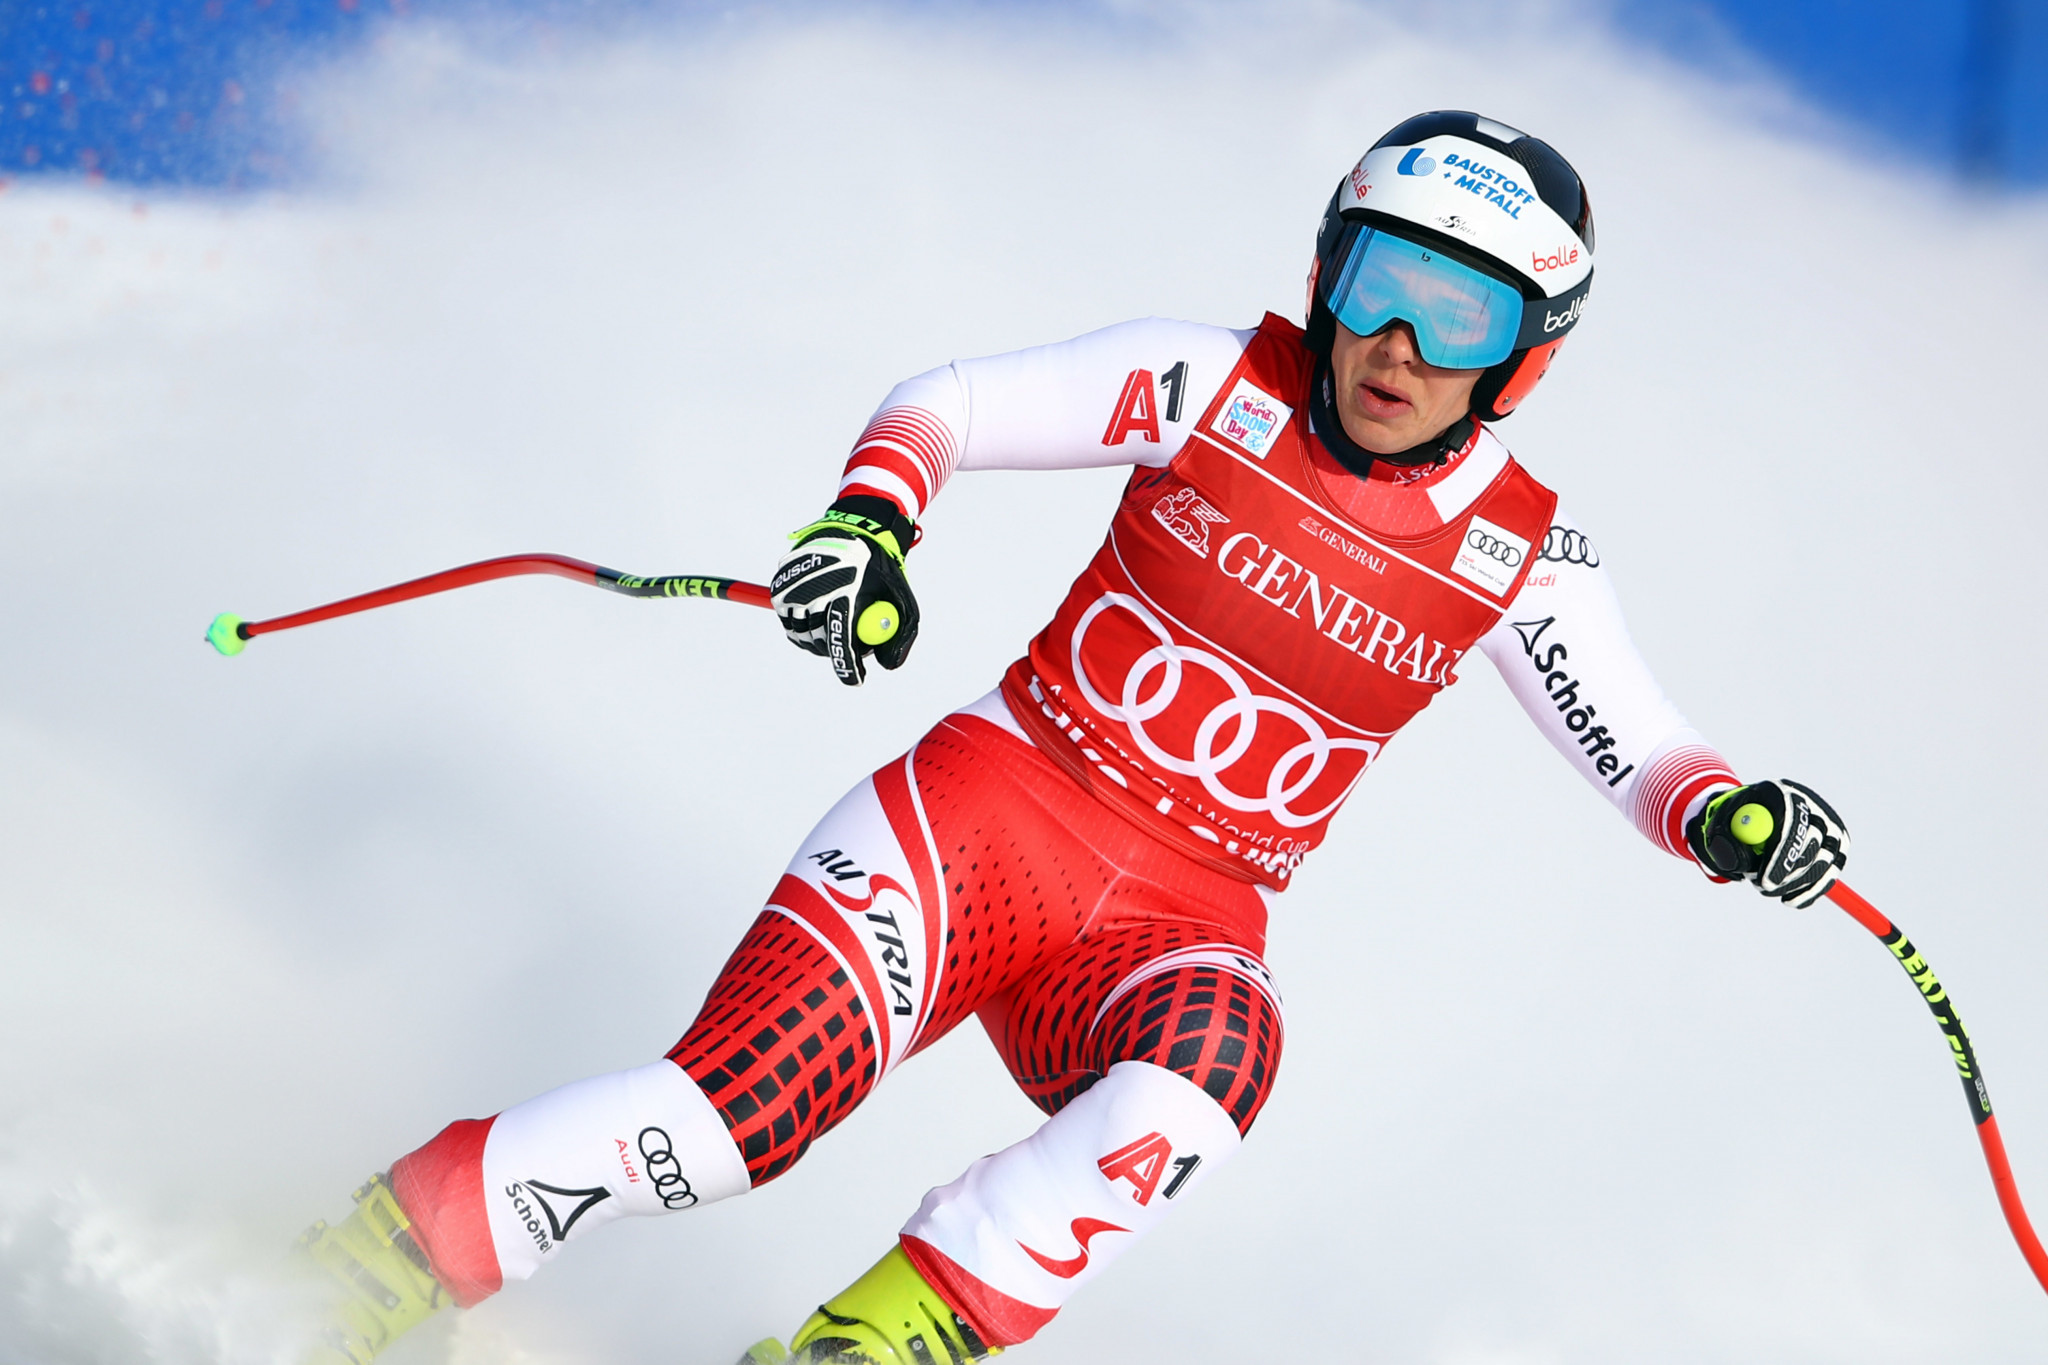 Schmidhofer dominates downhill again at FIS Alpine Skiing World Cup